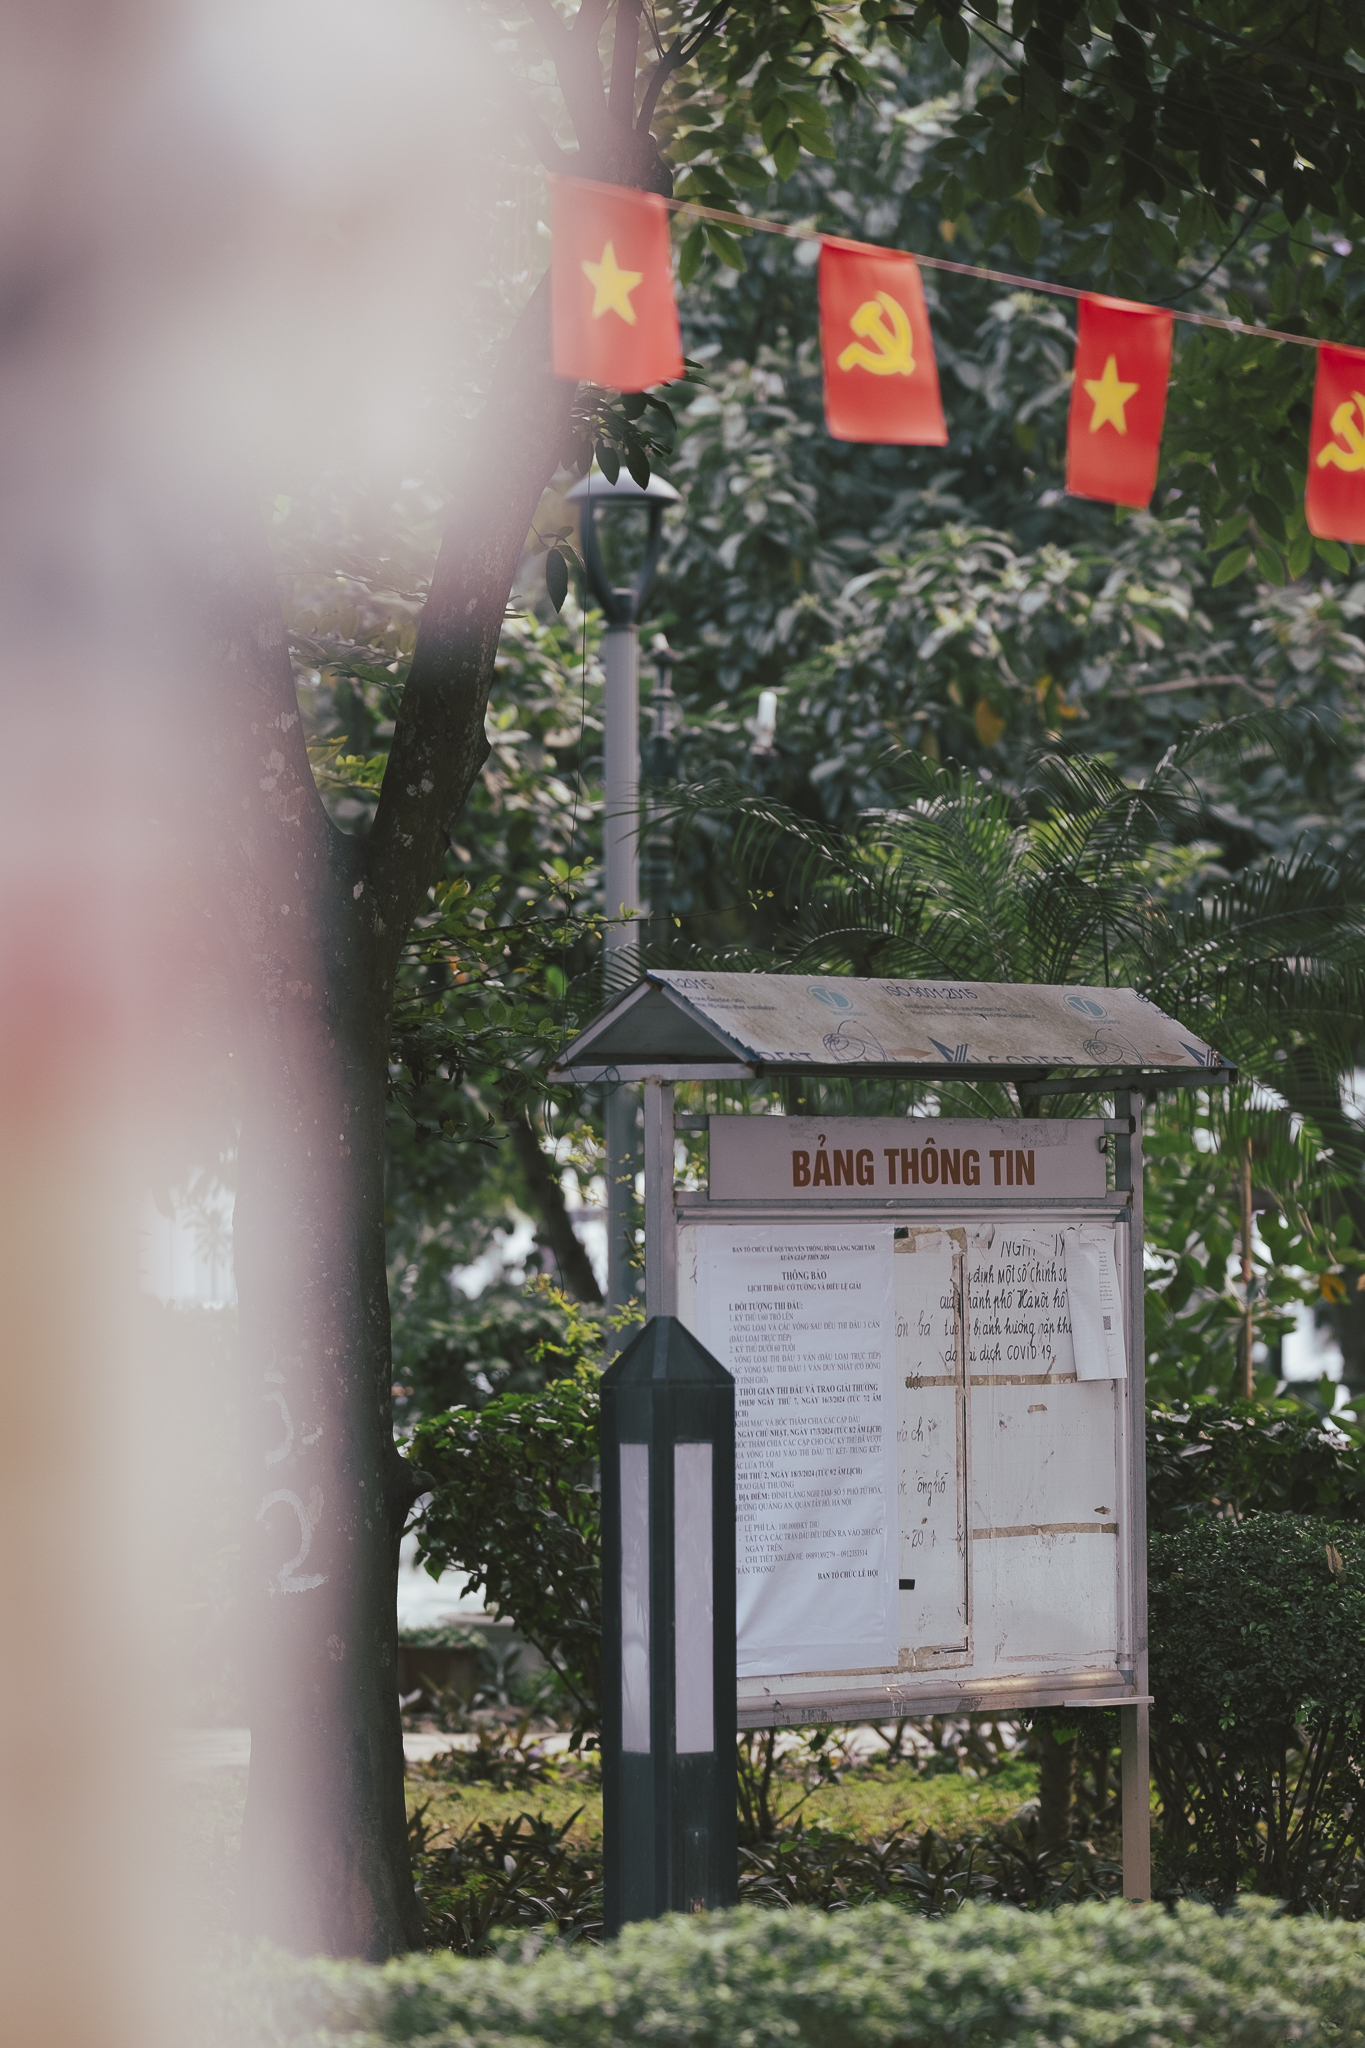 This is a 75mm photo of a community white board on the street, displaying current information for the local ward. Little red communist and vietnamese flags fly above. This is how politics, info and more happens: on a white board, by hand. There's also a public speaker twice or thrice a day, informing about things (and reminding of citizen's duty to believe in the party).